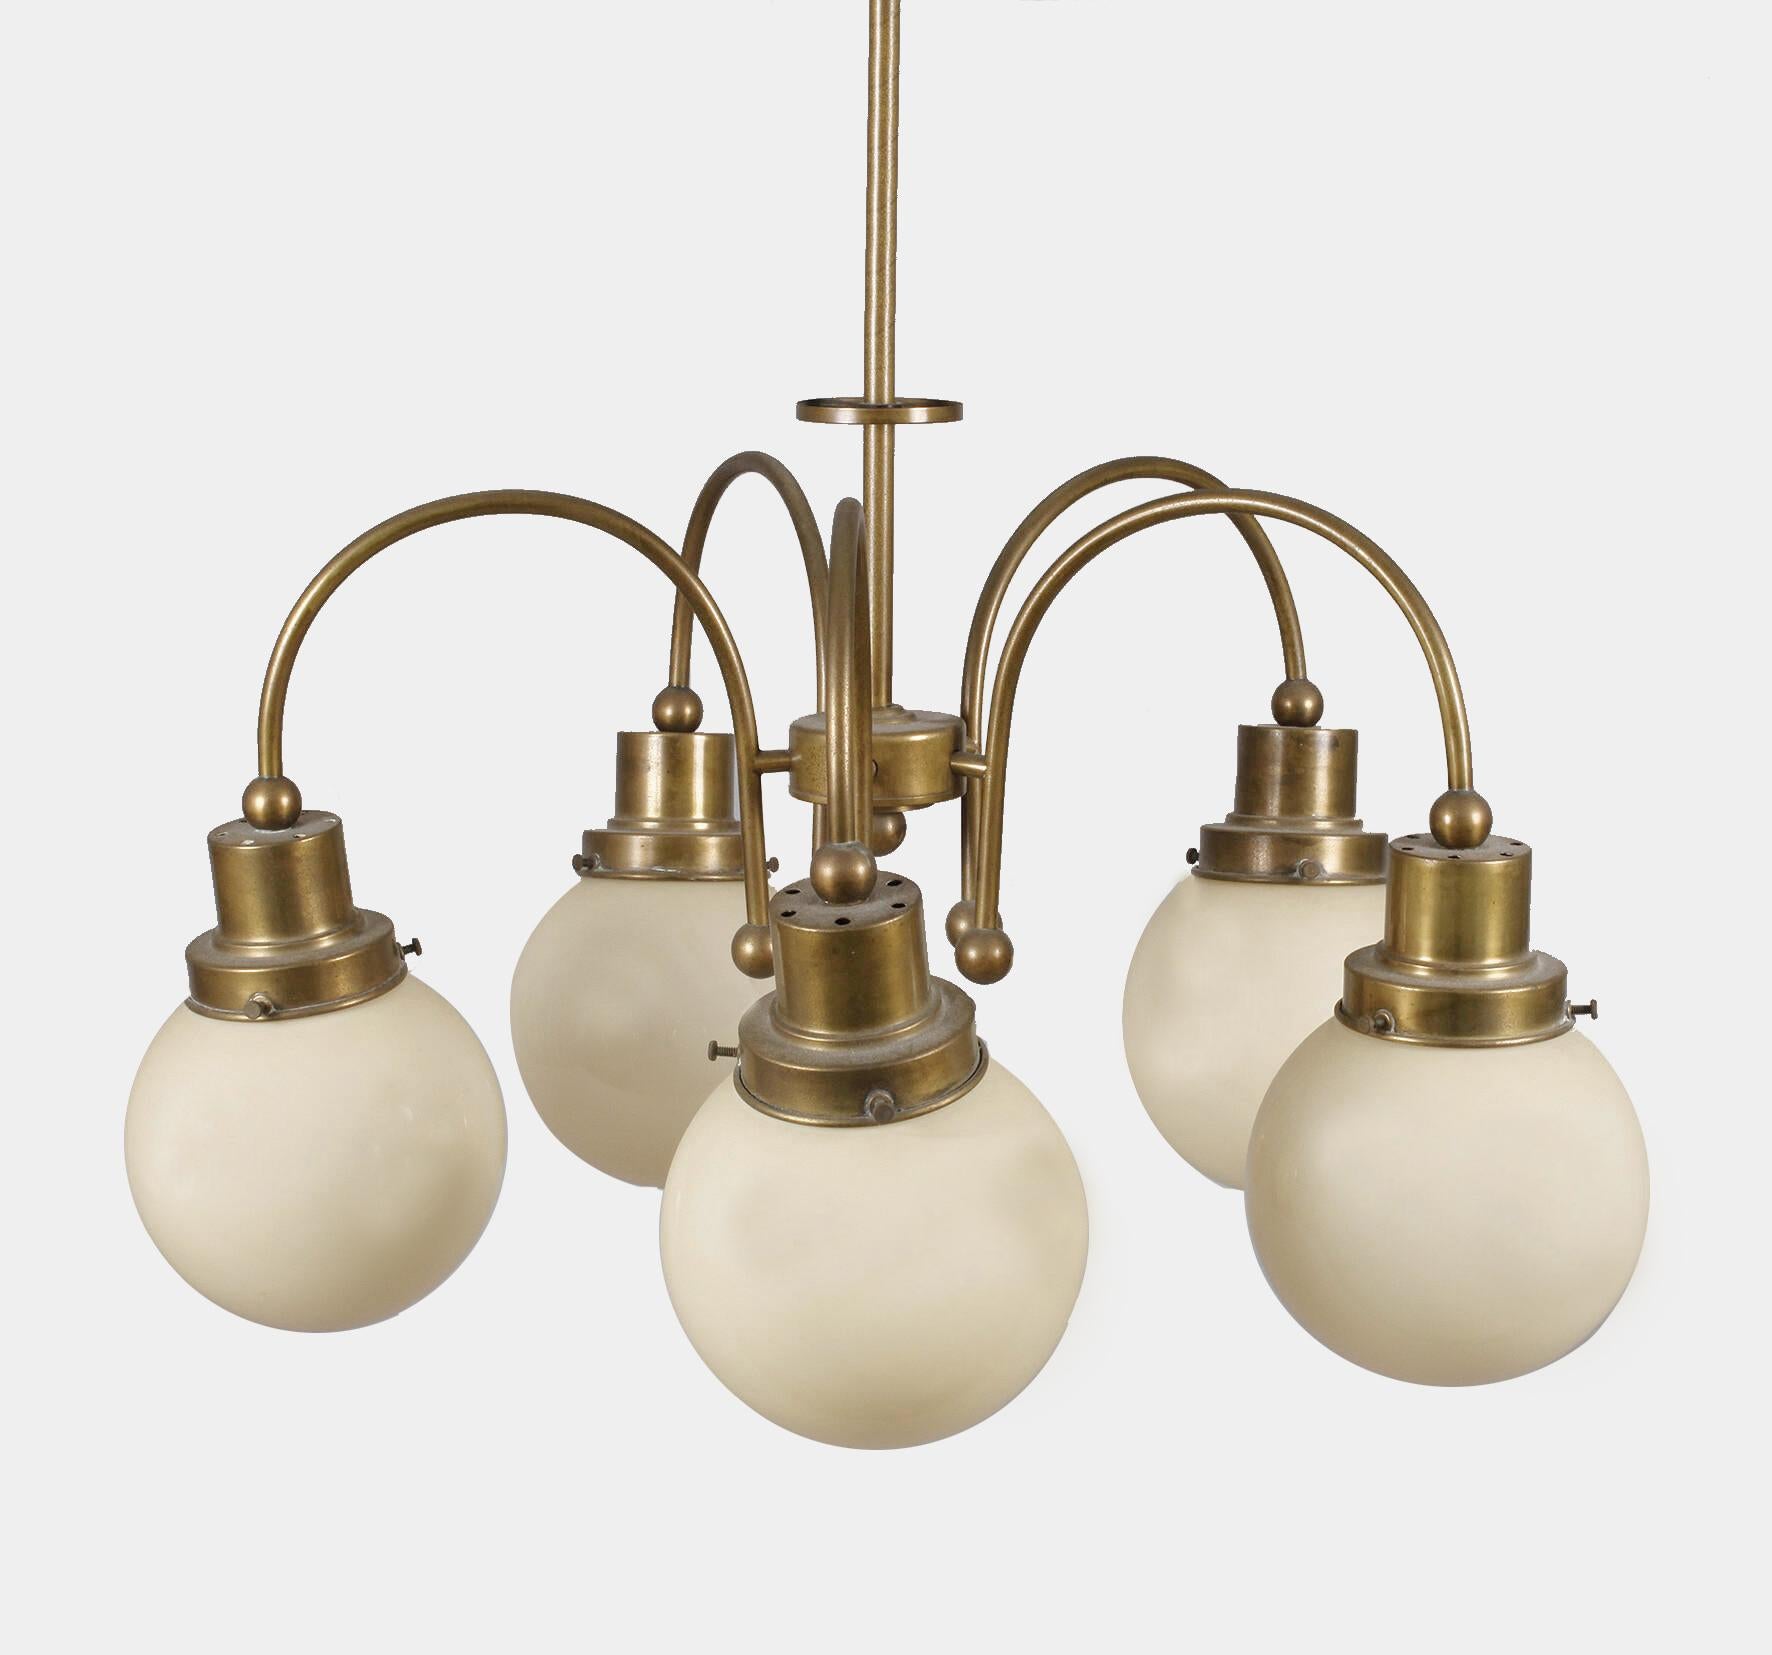 Bauhaus school 5 opal globe chandelier in original good condition, late 1920s-early 1930s.
Rewired, carrying five E27 light bulb fittings compatible with US and UK standards.
The height of the chandelier can be customized.
Measures: Height 90